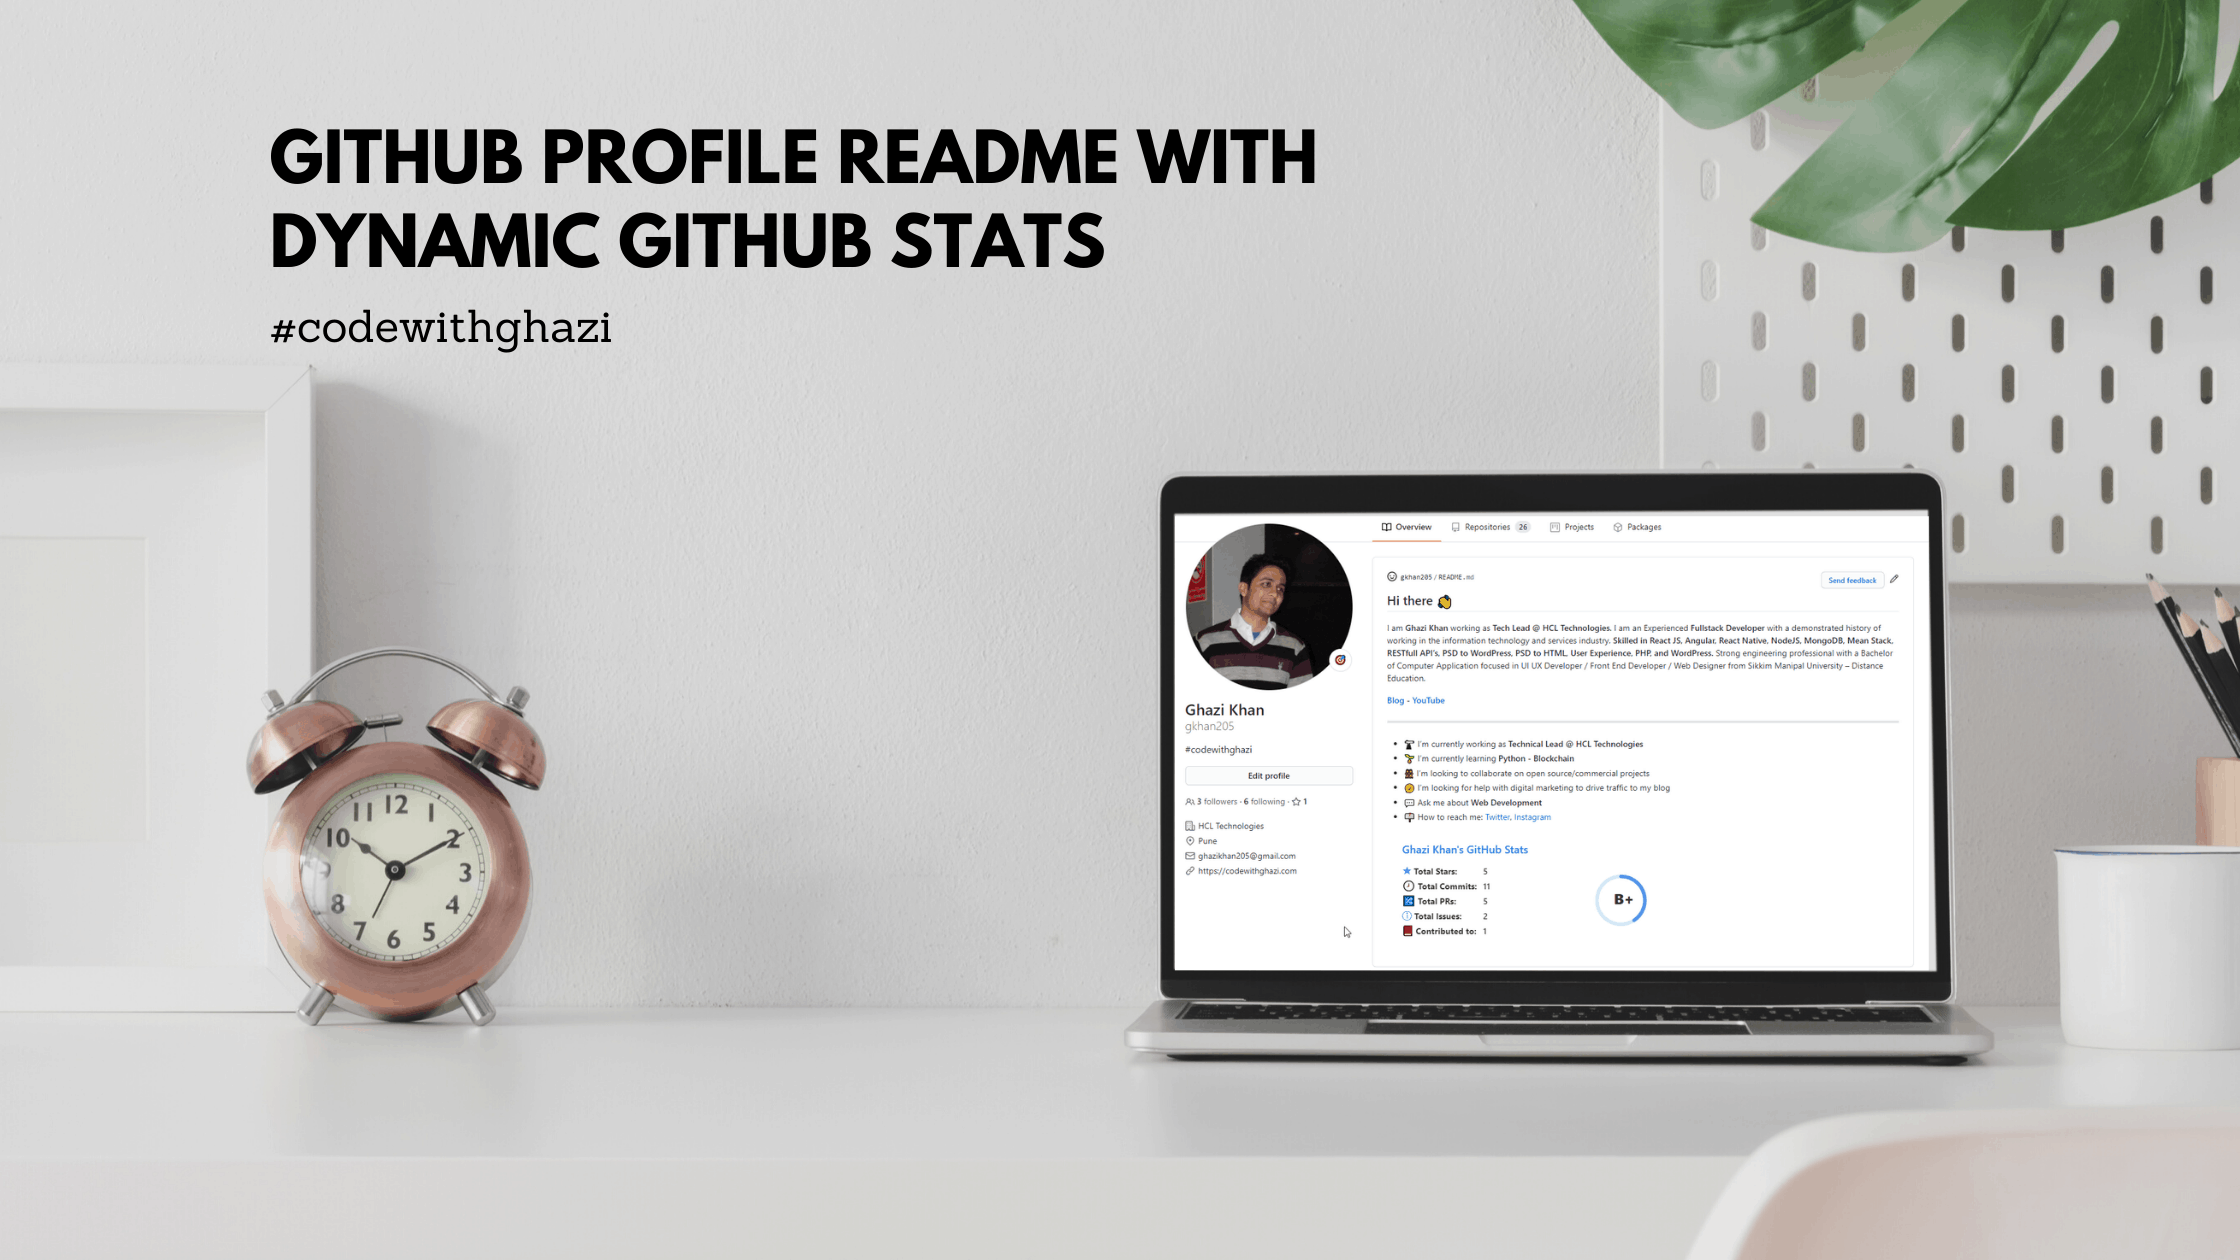 How to create a Github Profile README with Dynamic Github Stats